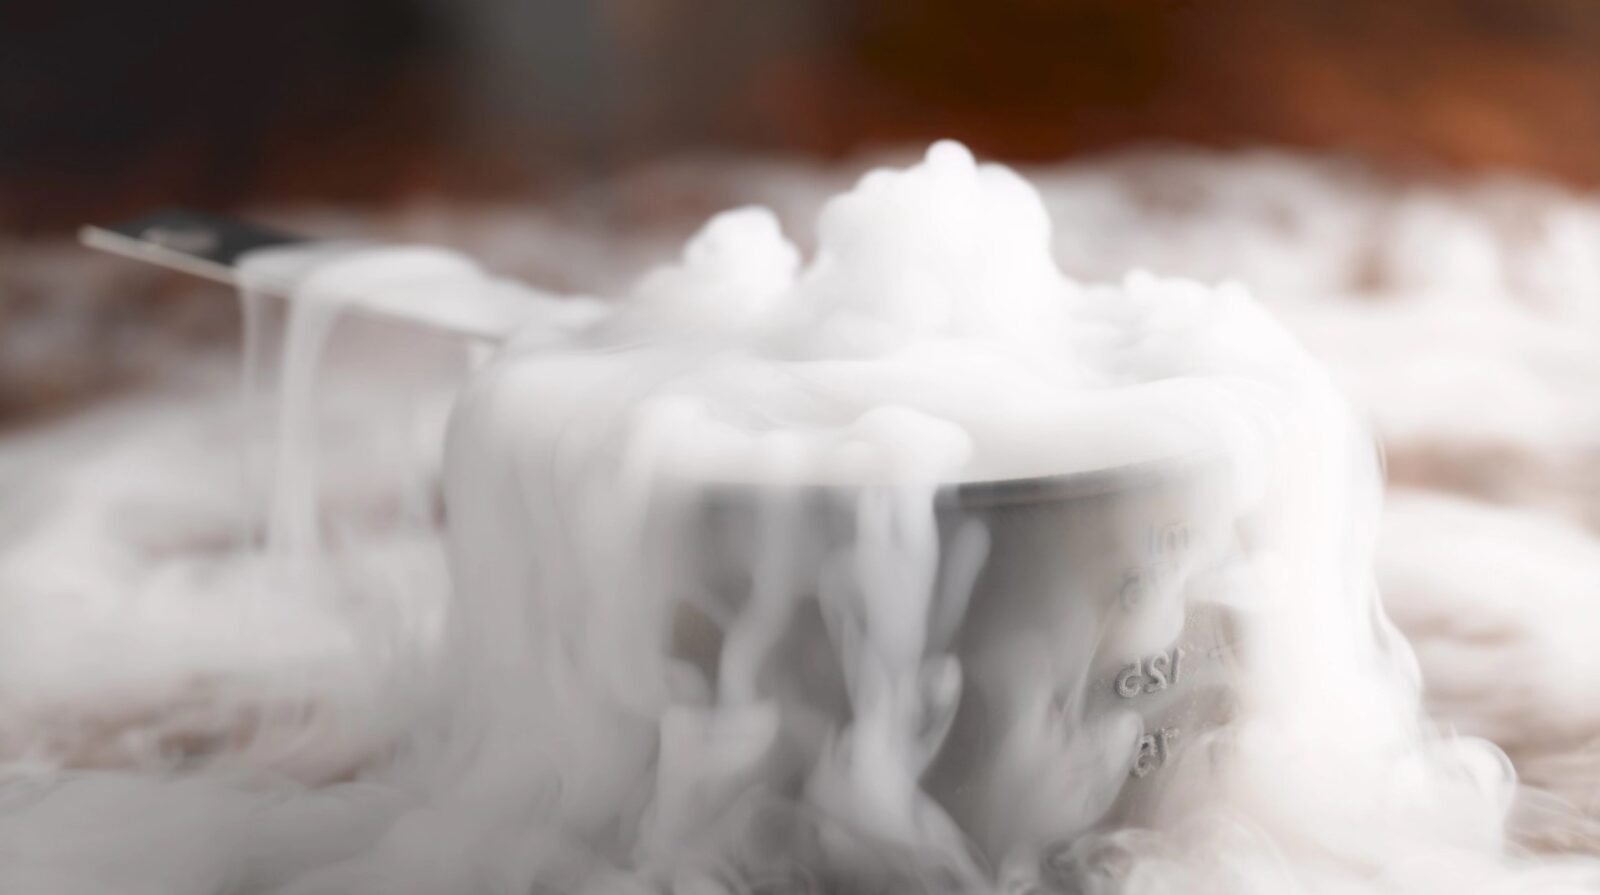 How To Dispose Of Dry Ice Safely - Valuable 6 Steps & 7 Tips